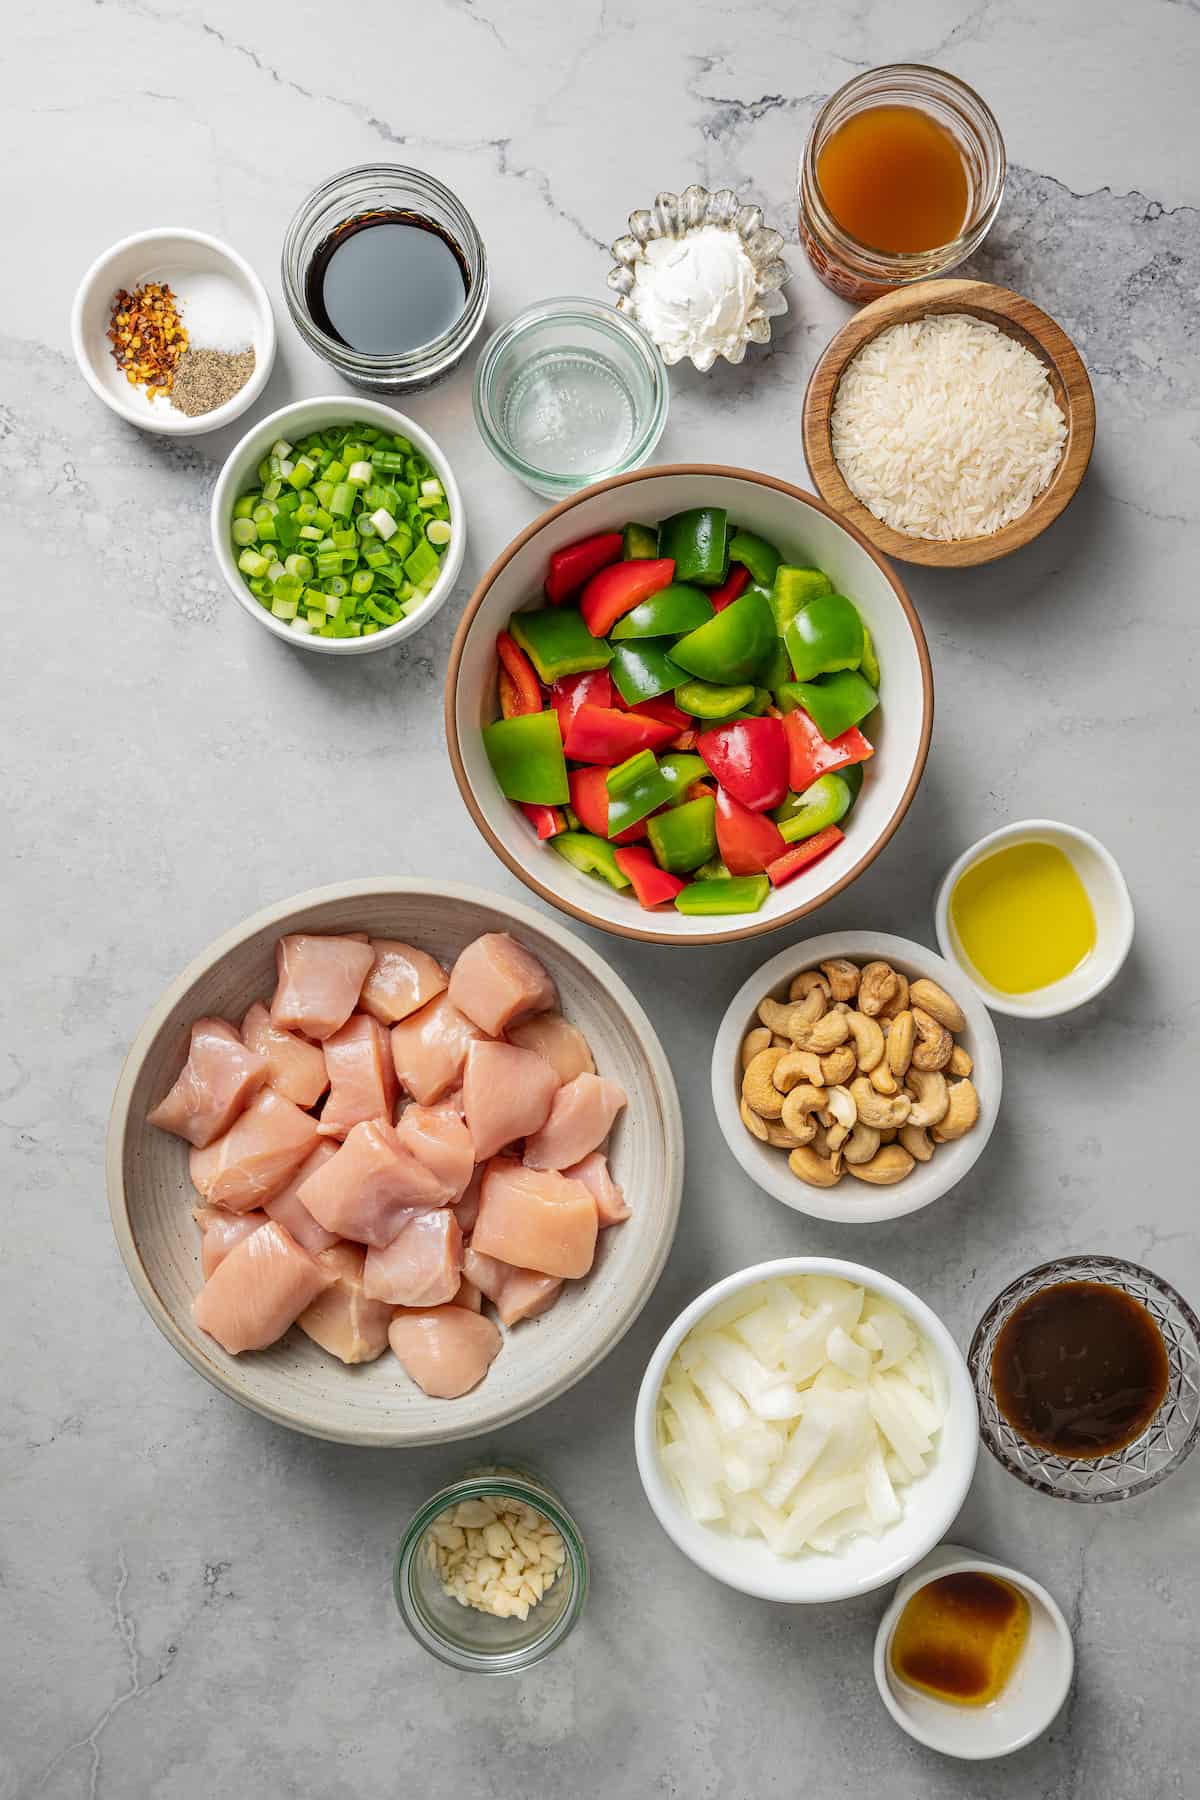 Overhead view of the ingredients needed for cashew chicken: A bowl of raw chicken cubes, a bowl of red and green bell peppers, a bowl of scallions, a bowl of cashews, a bowl of oyster sauce, a bowl of uncooked rice, a bowl of chicken broth, a bowl of cornstarch, a bowl of soy sauce, a bowl of olive oil, a bowl of sesame oil, a bowl of garlic, a bowl of rice vinegar, a bowl of onions, and a bowl of salt, pepper, and chili flakes